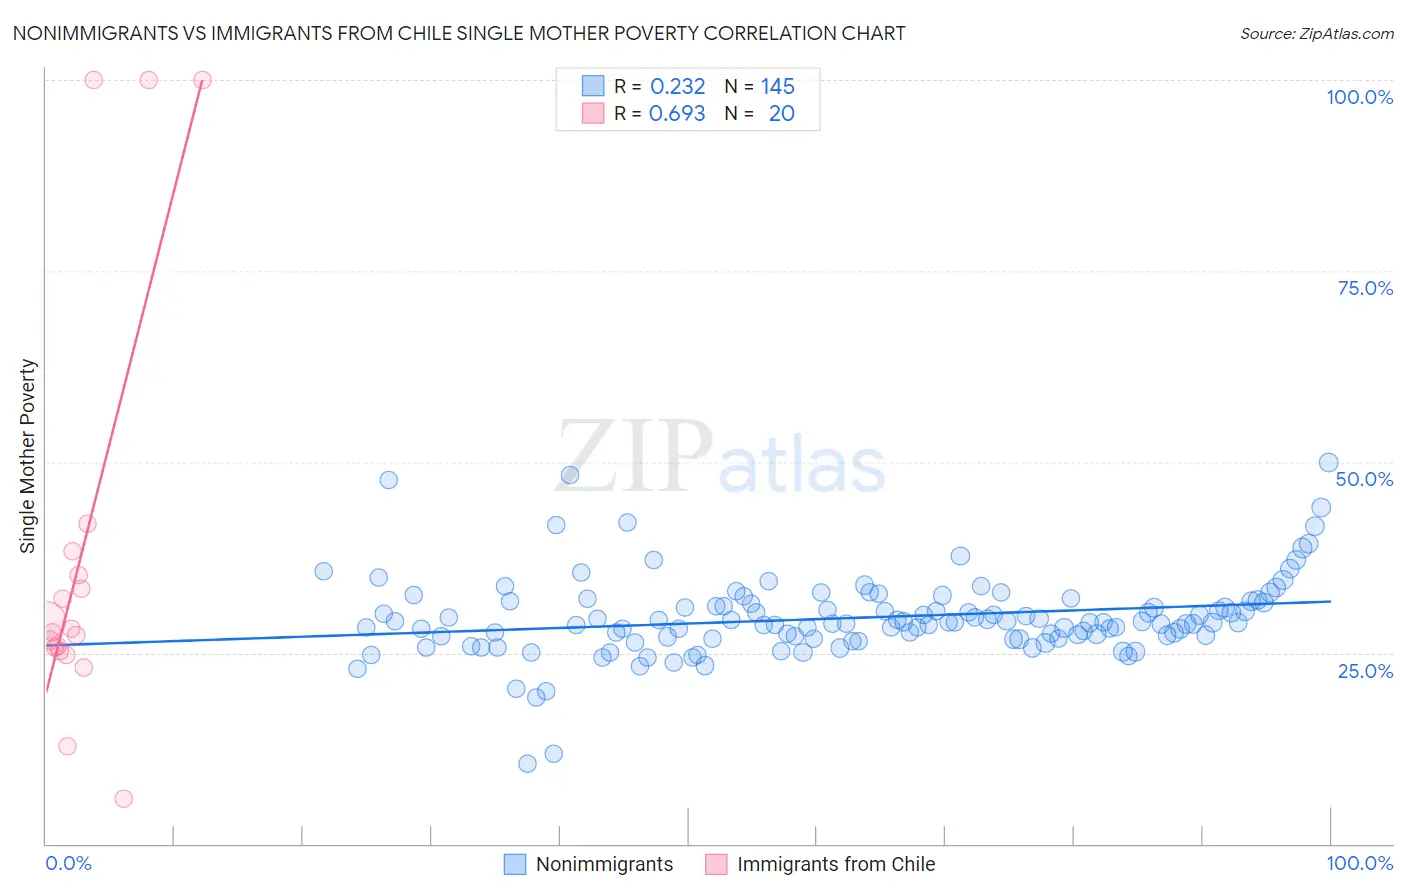 Nonimmigrants vs Immigrants from Chile Single Mother Poverty